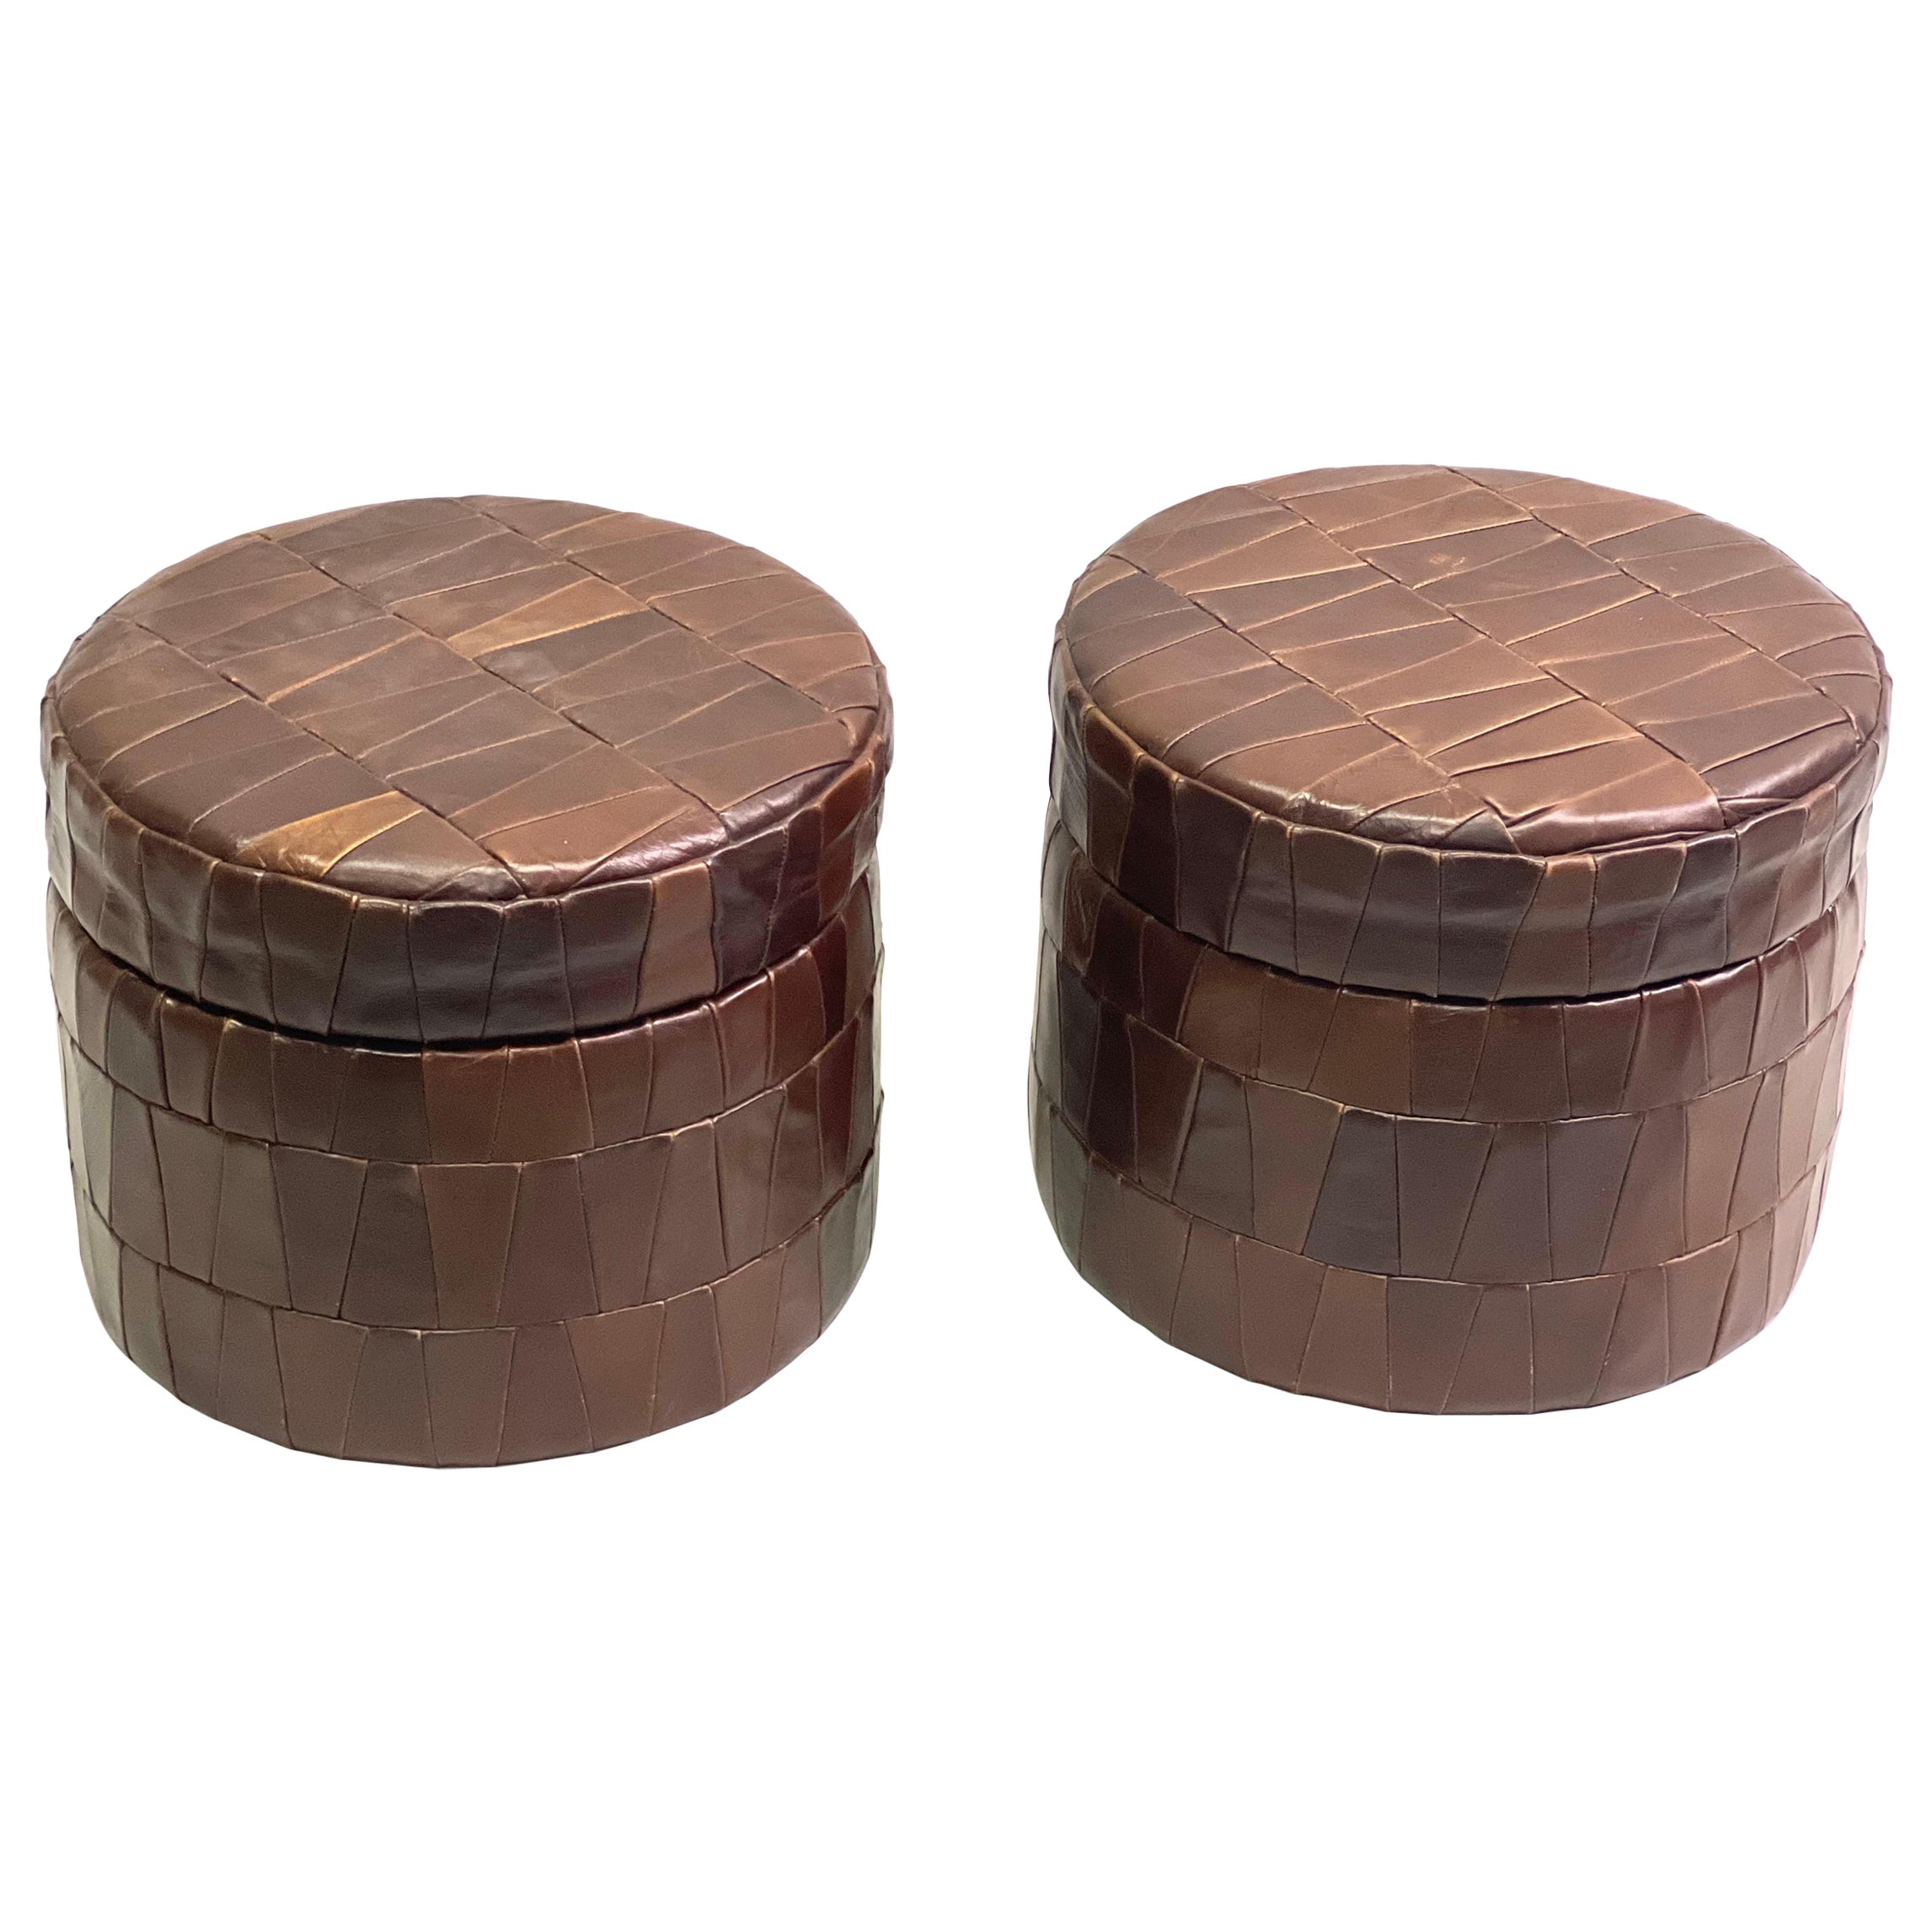 Pair of Swiss Modern Patchwork Leather Storage Ottomans/ Stools by De Sede, 1960